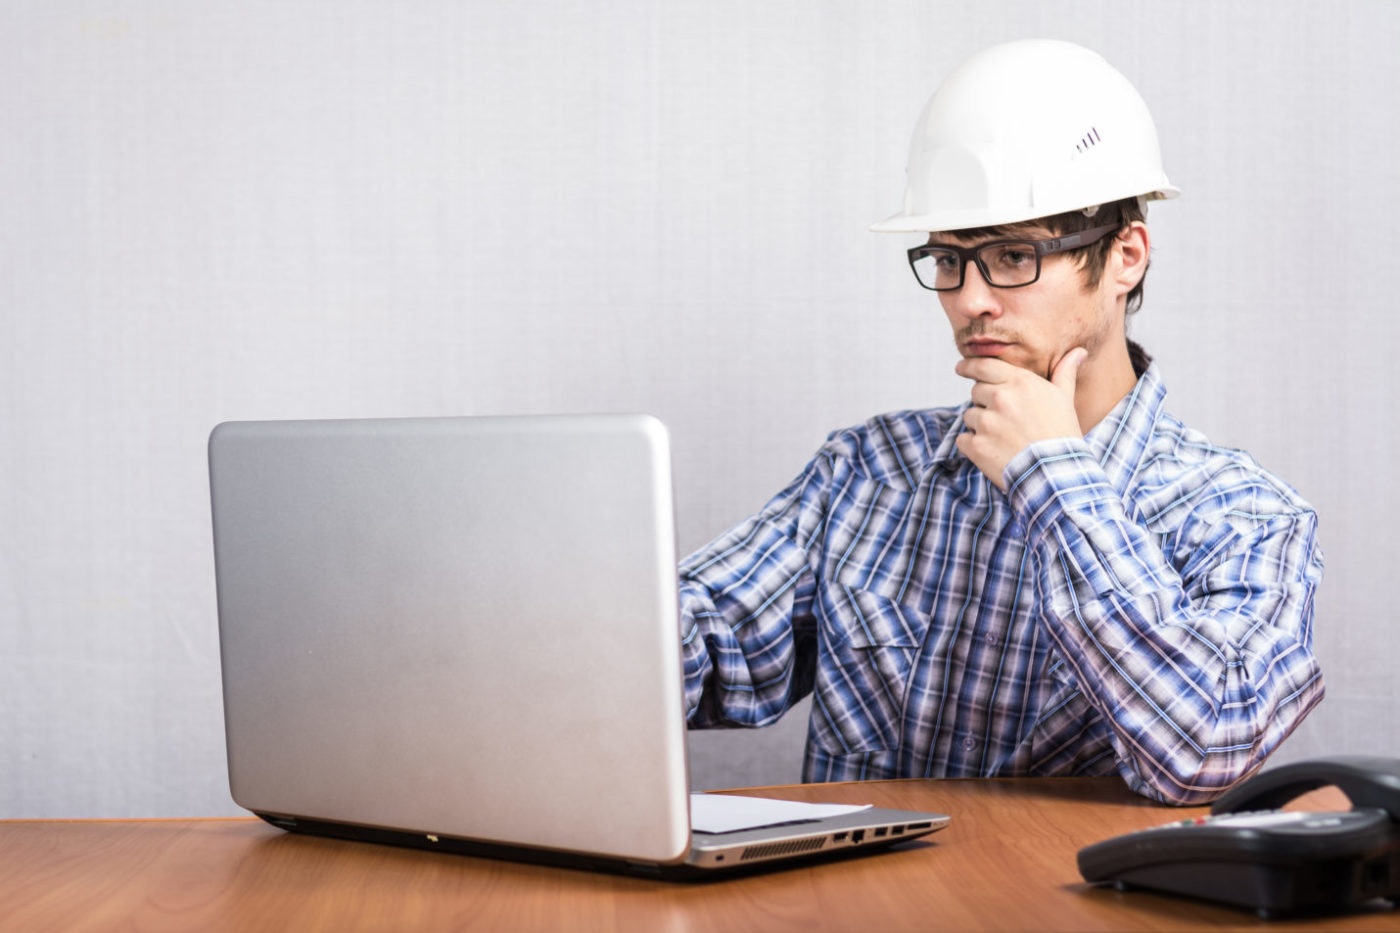 Construction Tips For More Jobs And Money